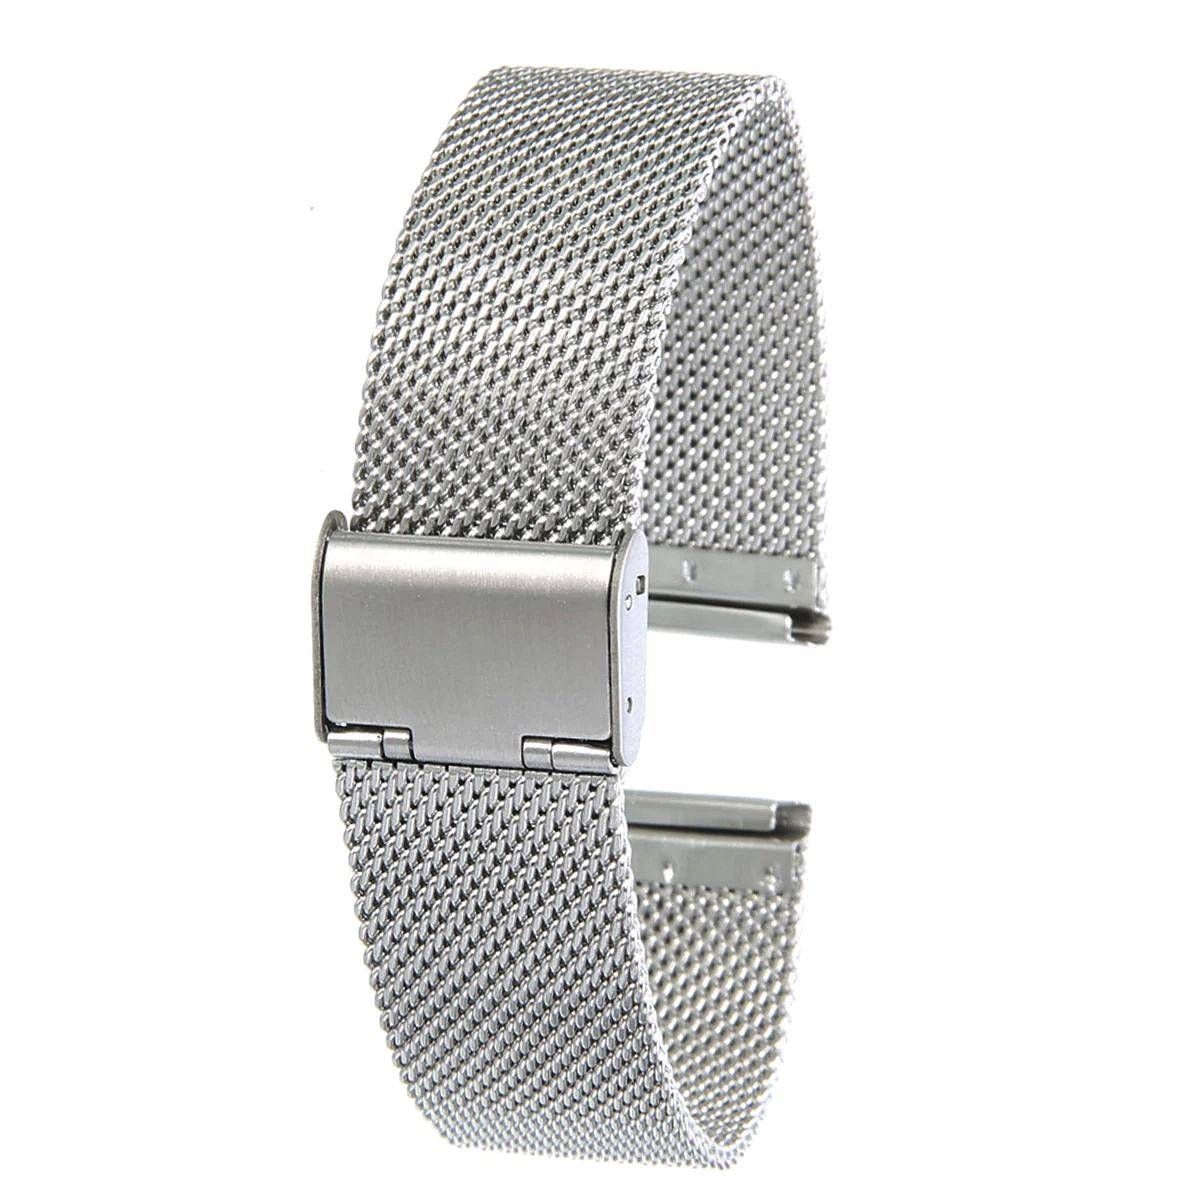 Stainless Steel Mesh Watch Band With Adjustable Clasp » Band And Bracelets